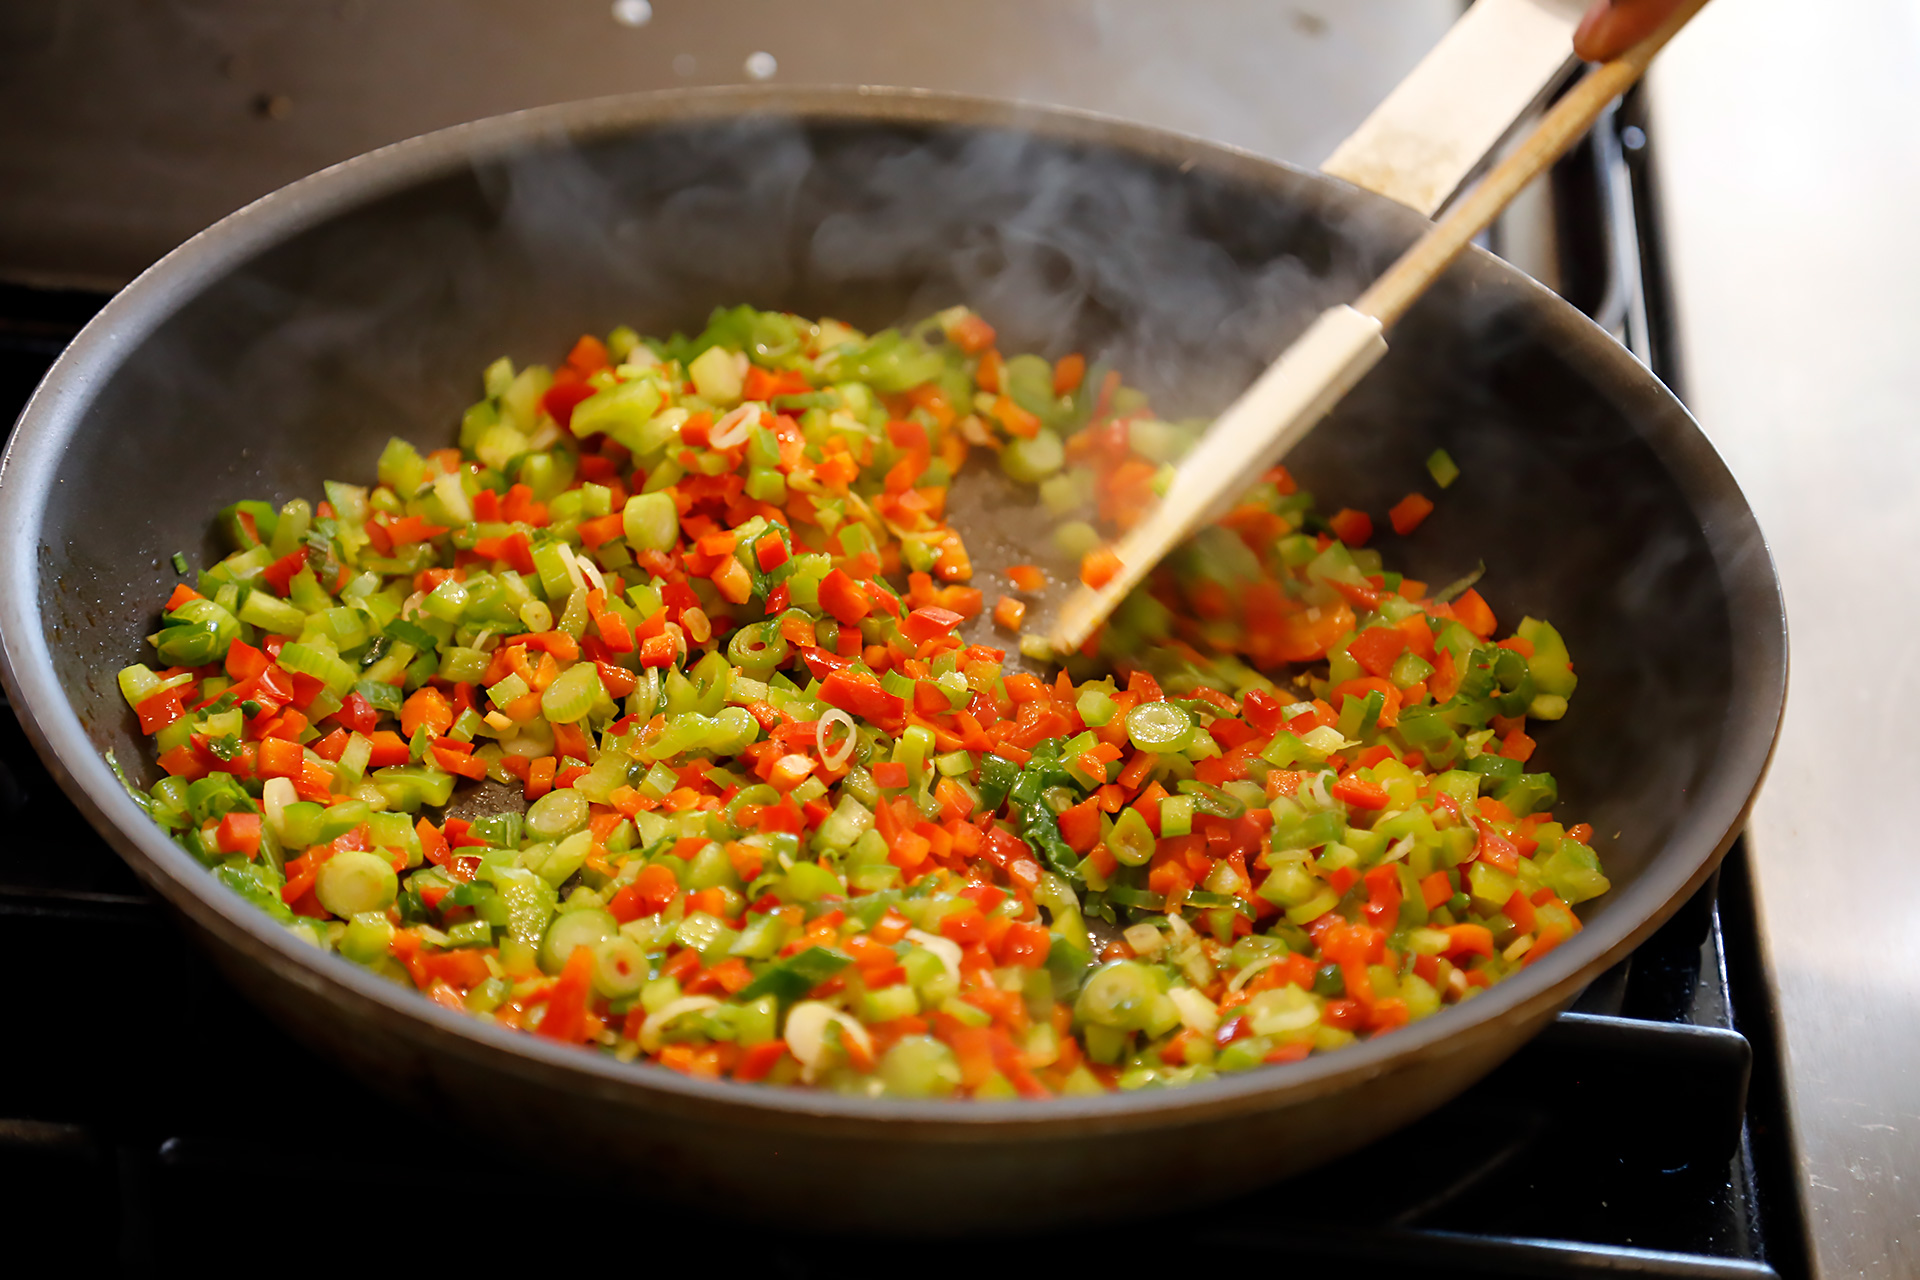 Heat oil in a large sauté pan until shimmering. Add bell peppers, scallions/green onions, and garlic.